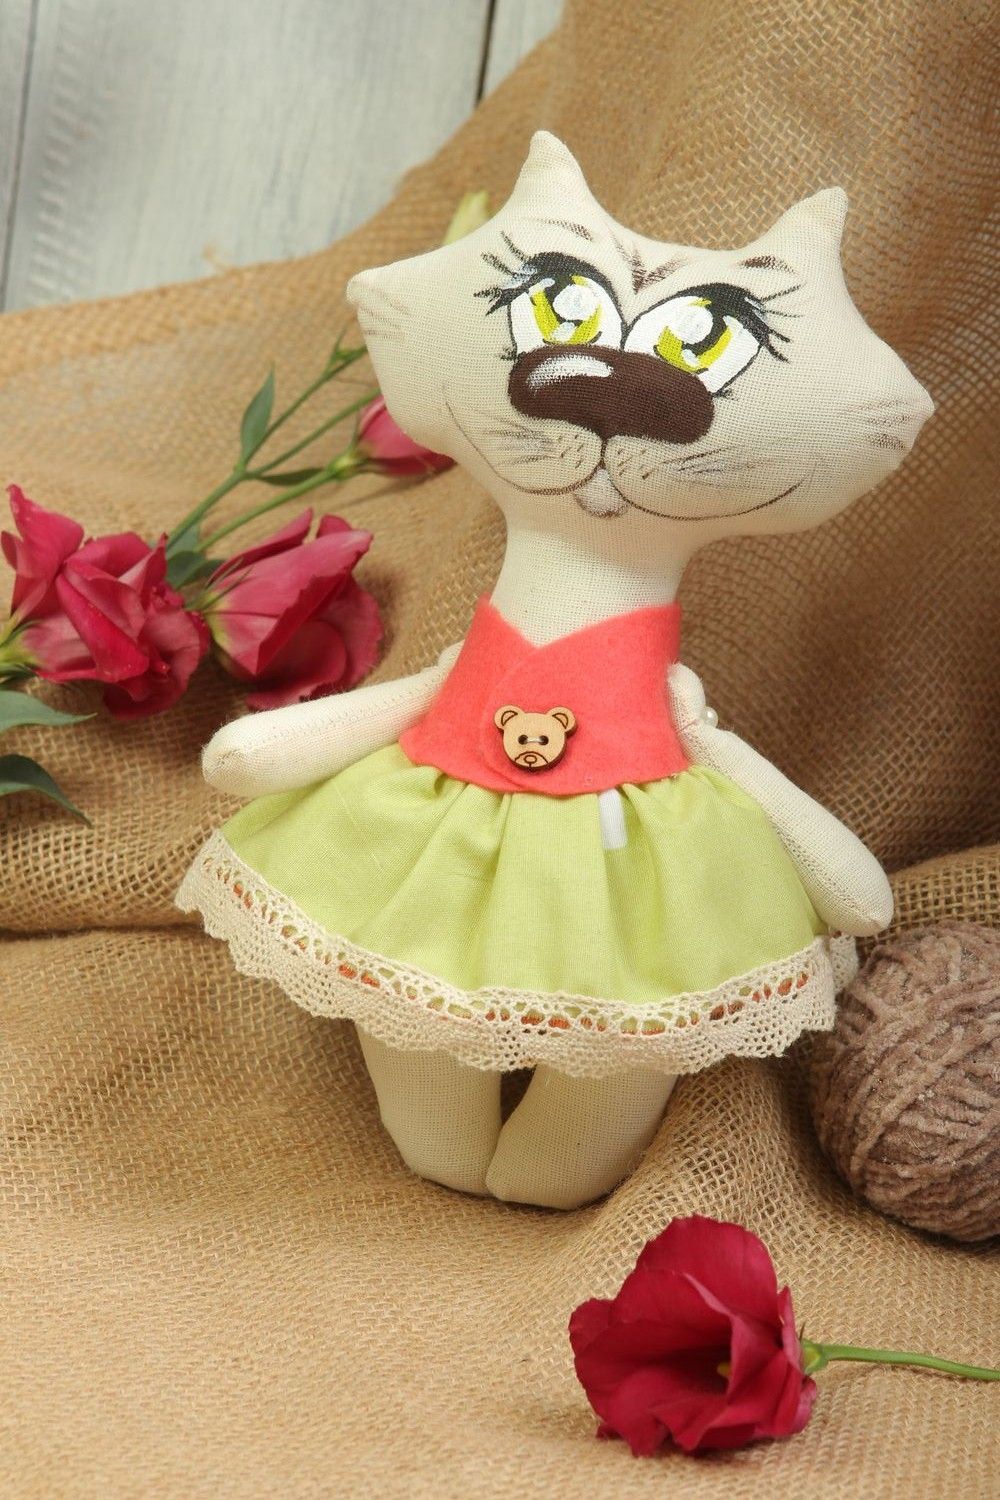 Cute textile soft toys interesting unusual accessories lovely handmade decor photo 1